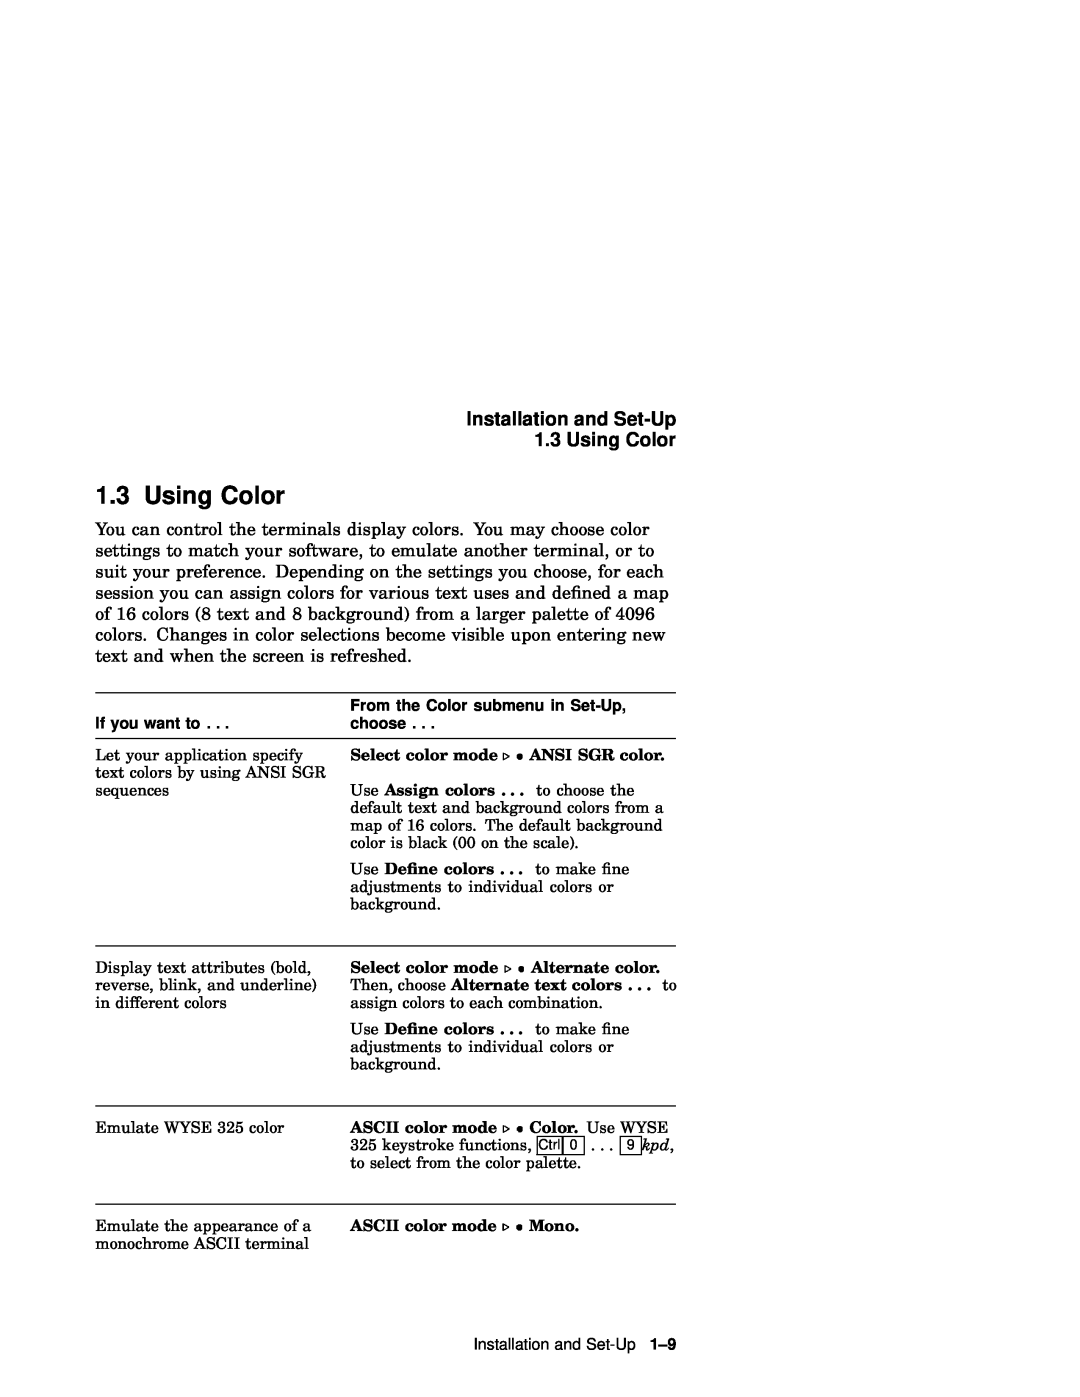 IBM WS525 manual Installation and Set-Up 1.3 Using Color 